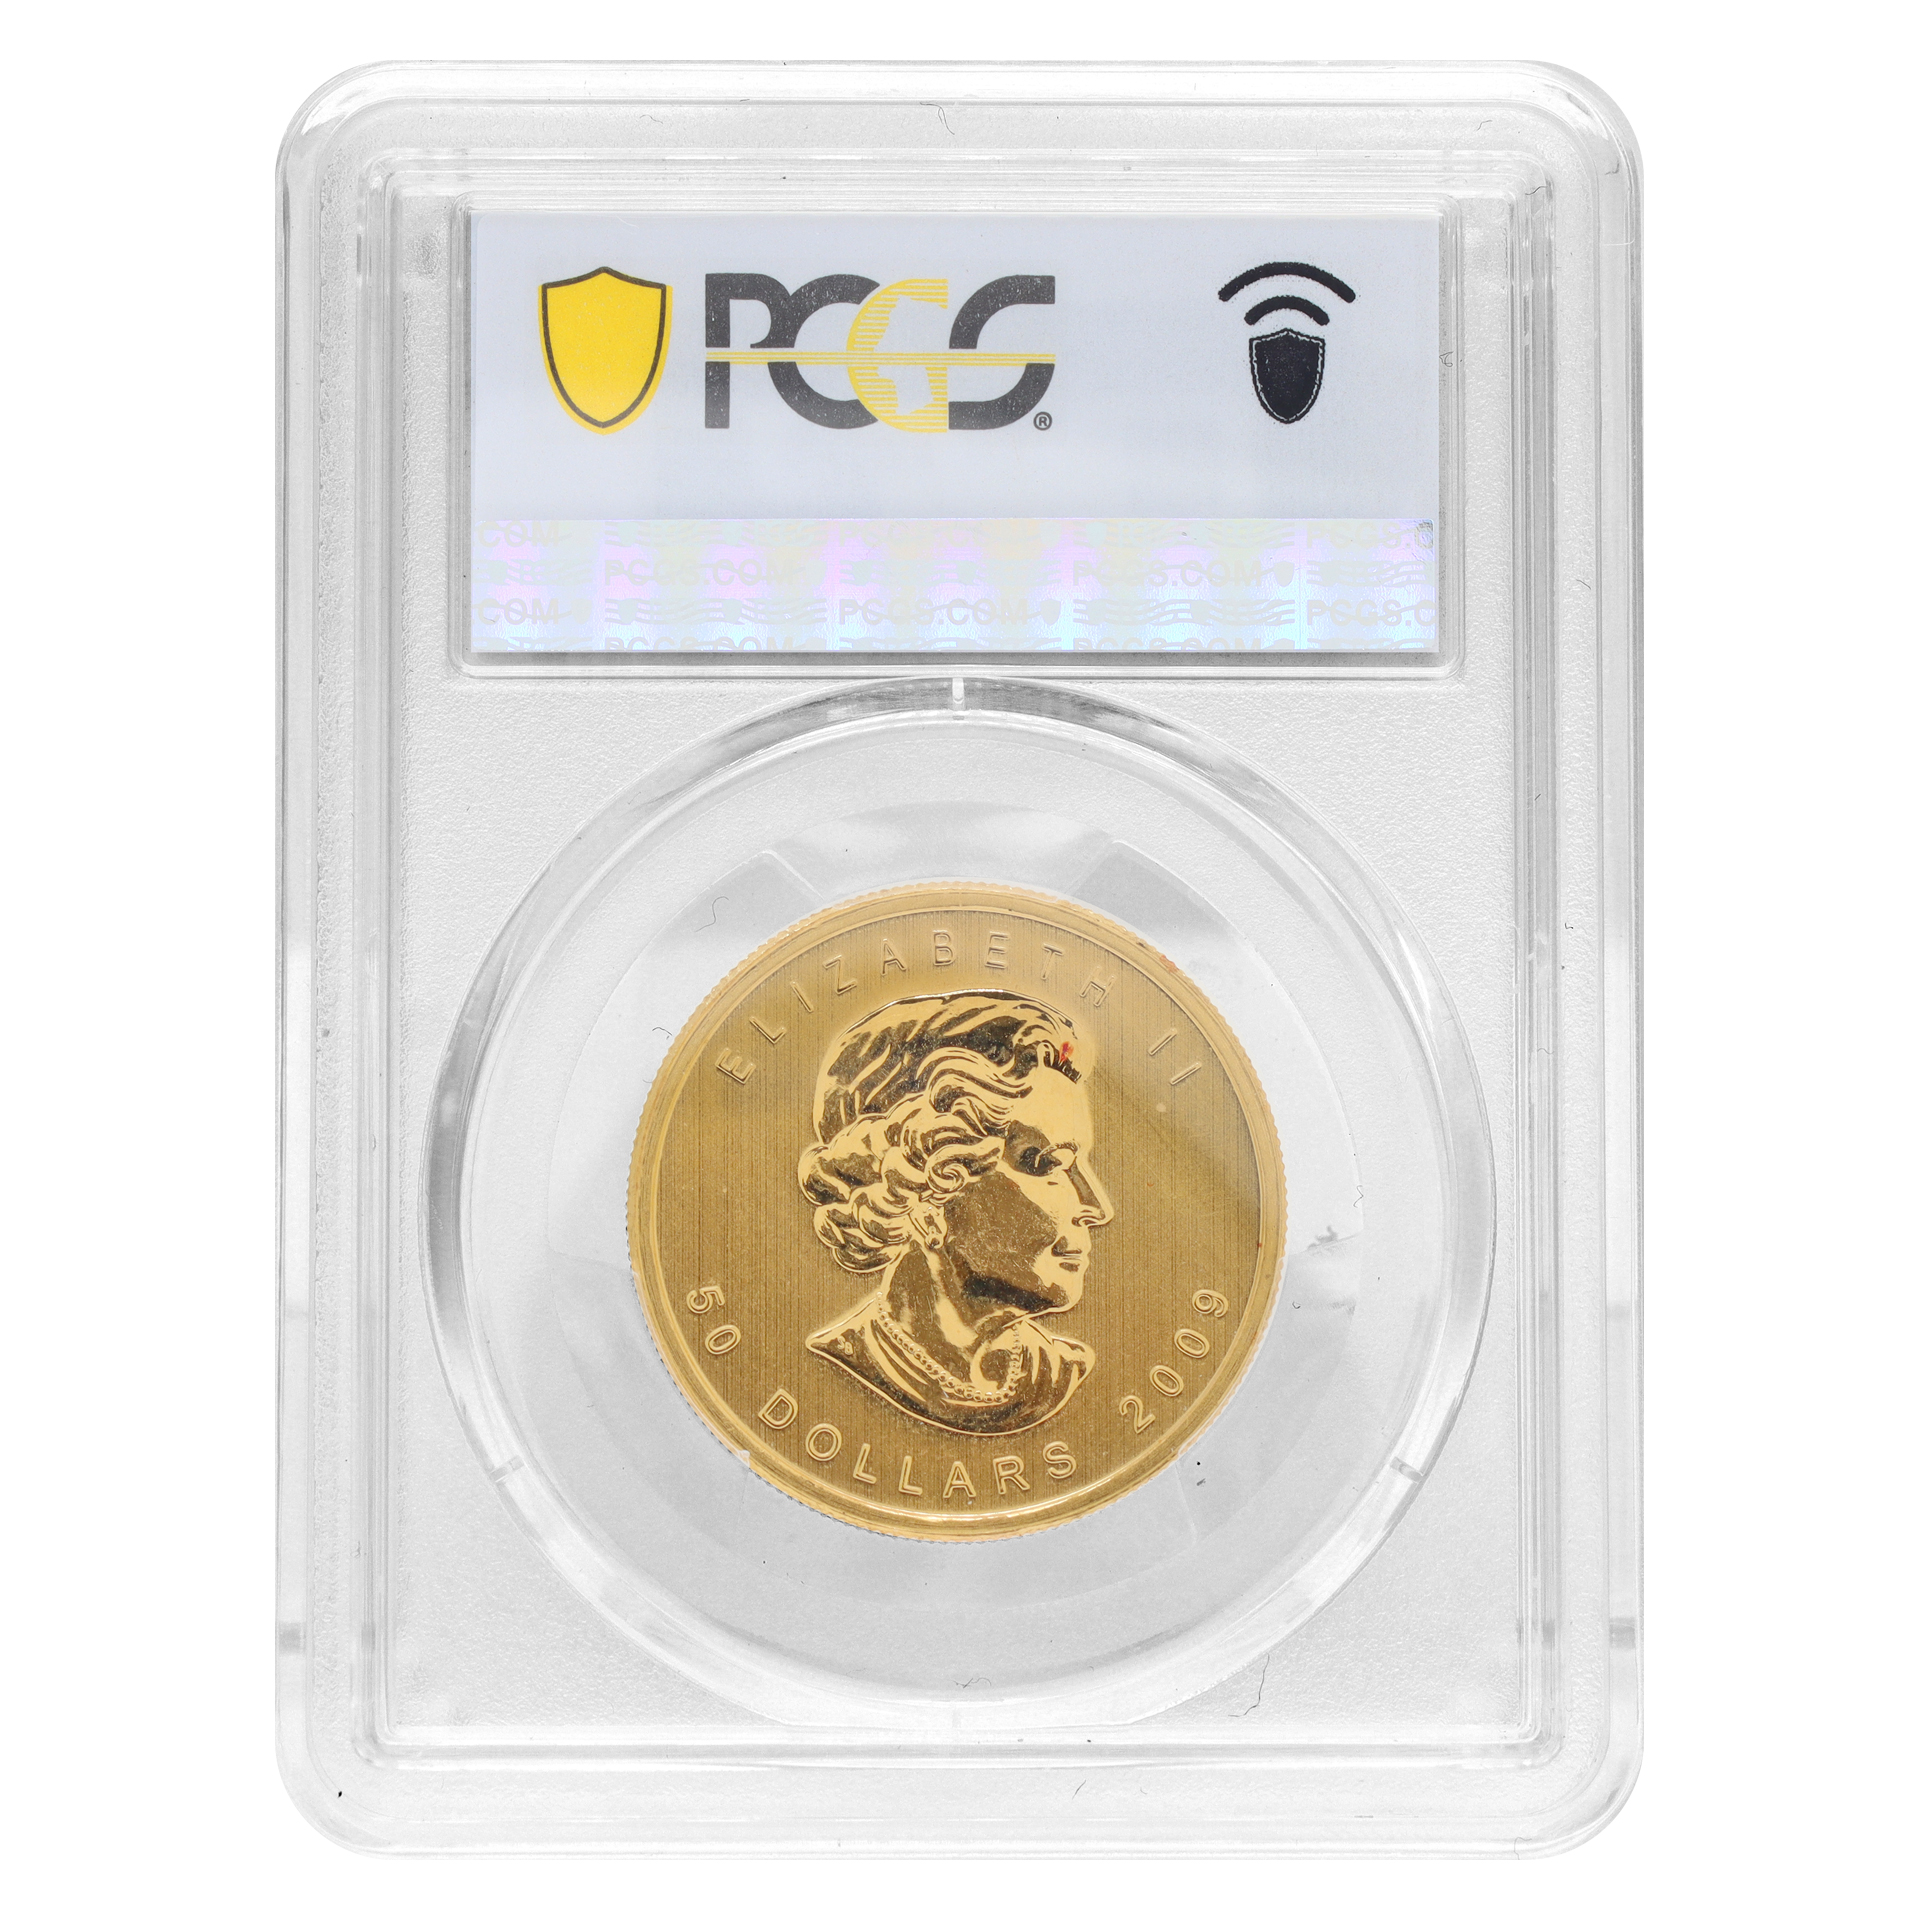 Canadian Maple Leaf $50 gold coin. 2009 PCGS MS66 (Default)